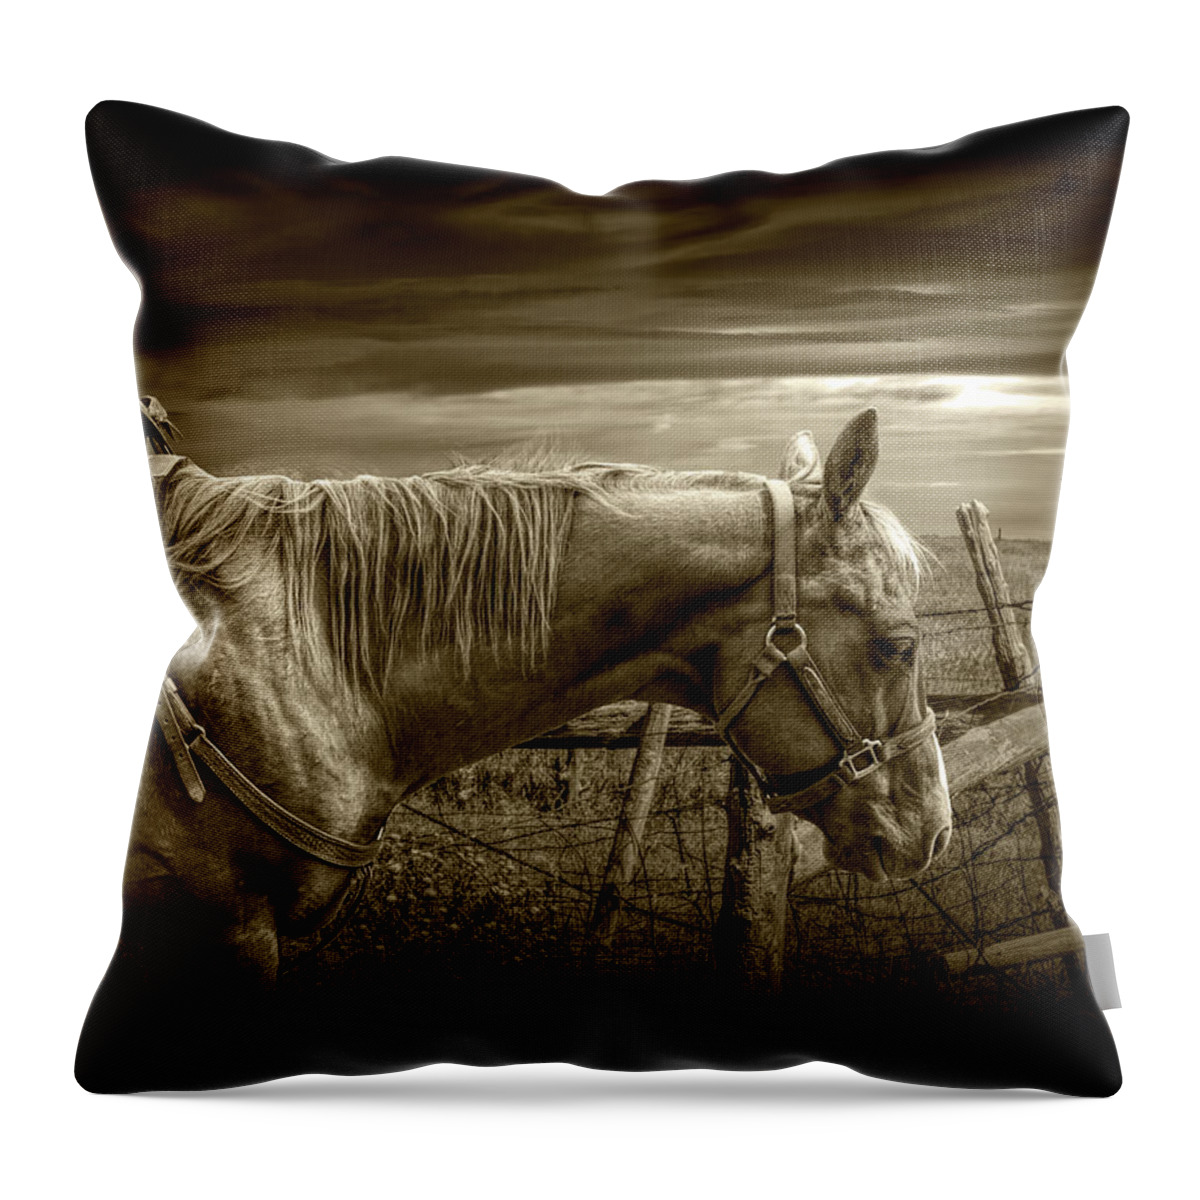 Saddle Throw Pillow featuring the photograph Sepia Tone of Back at the Ranch Saddle Horse by Randall Nyhof